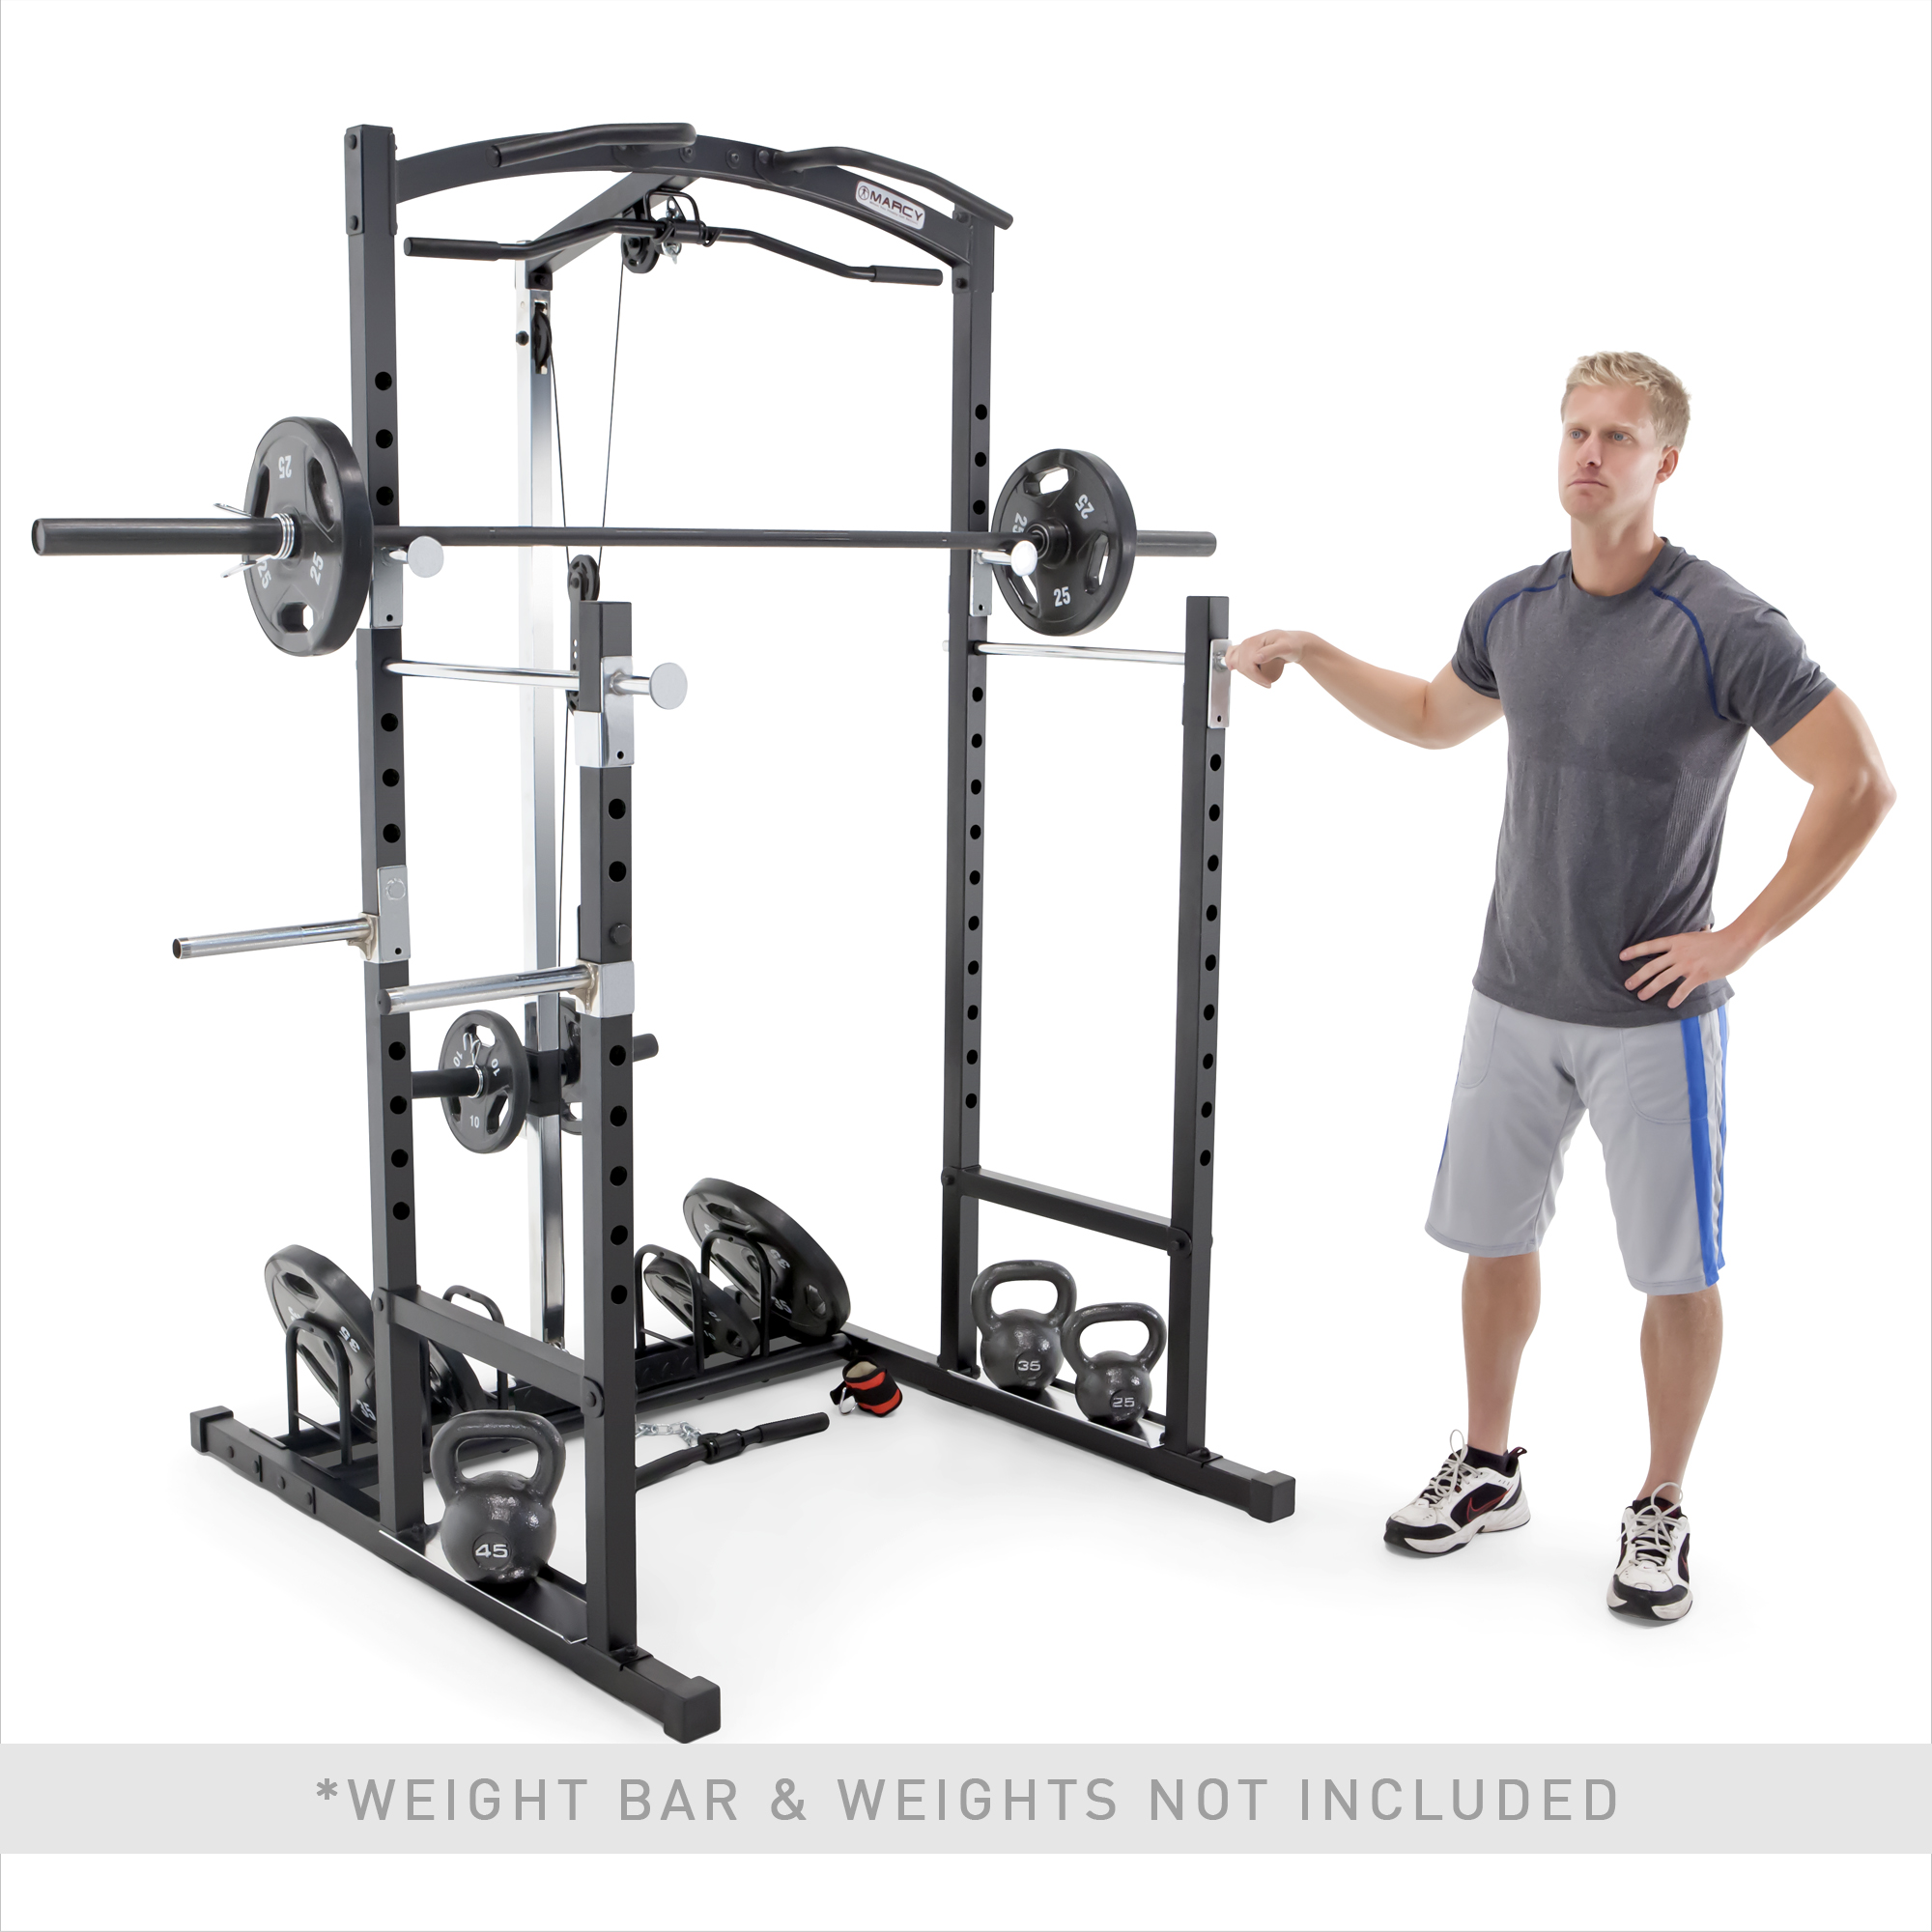 Marcy Home Gym Cage System MWM-7041 - image 2 of 12